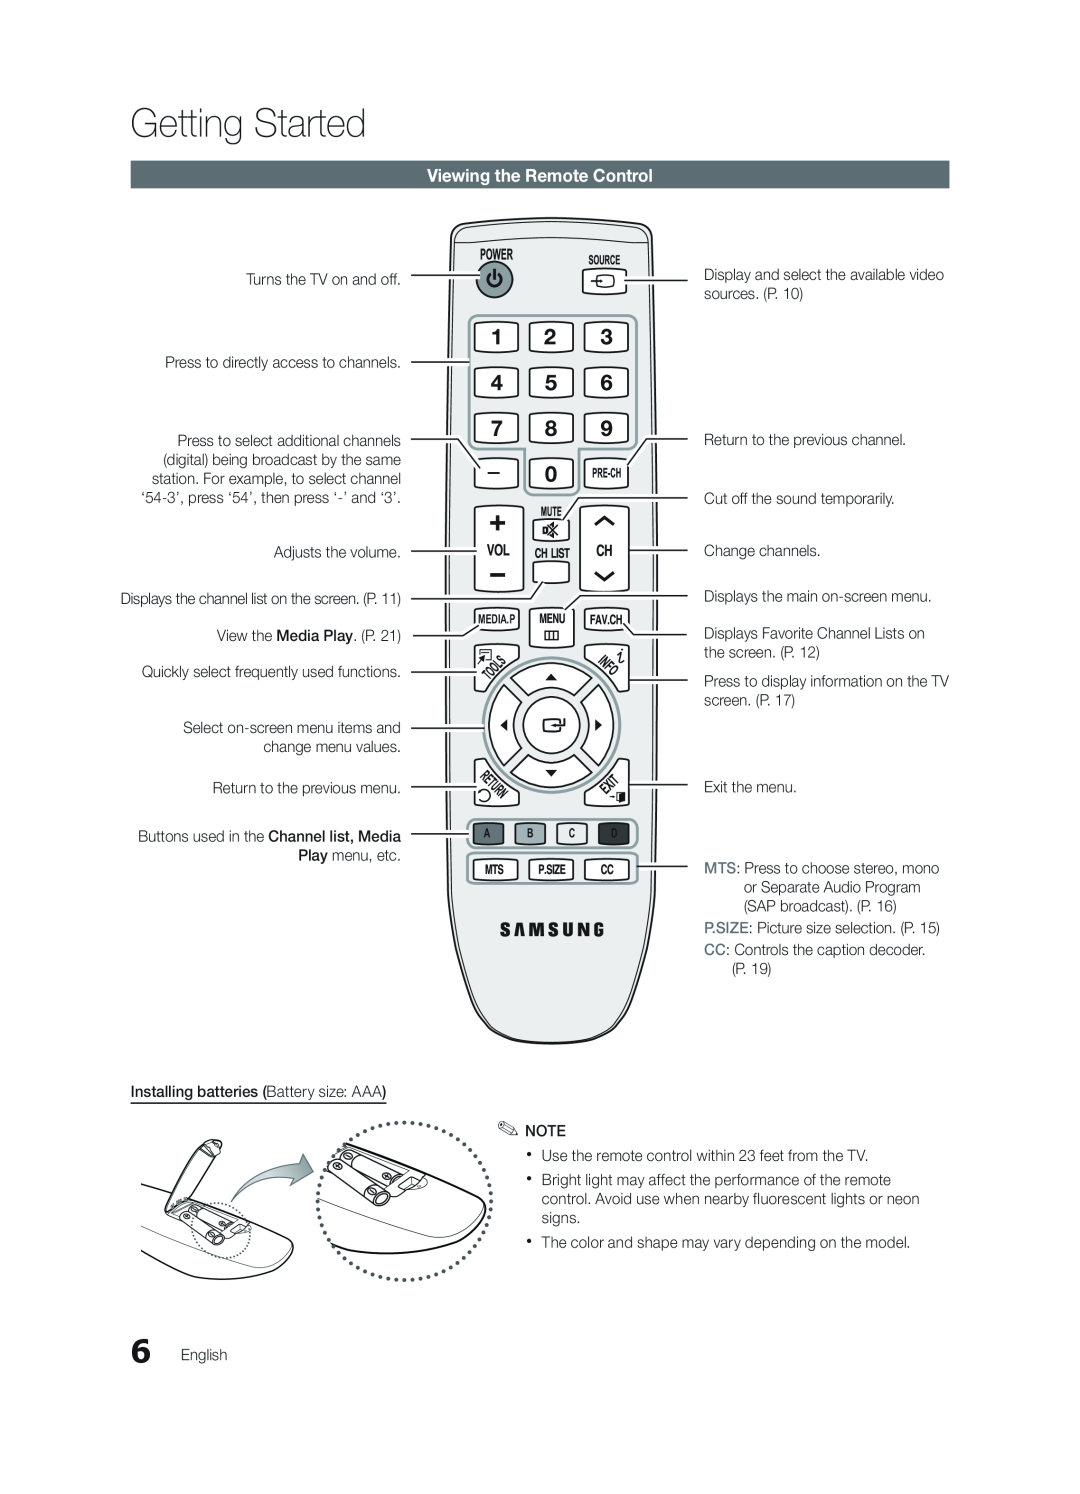 Samsung BN68-02620B-06 user manual Viewing the Remote Control, Getting Started 